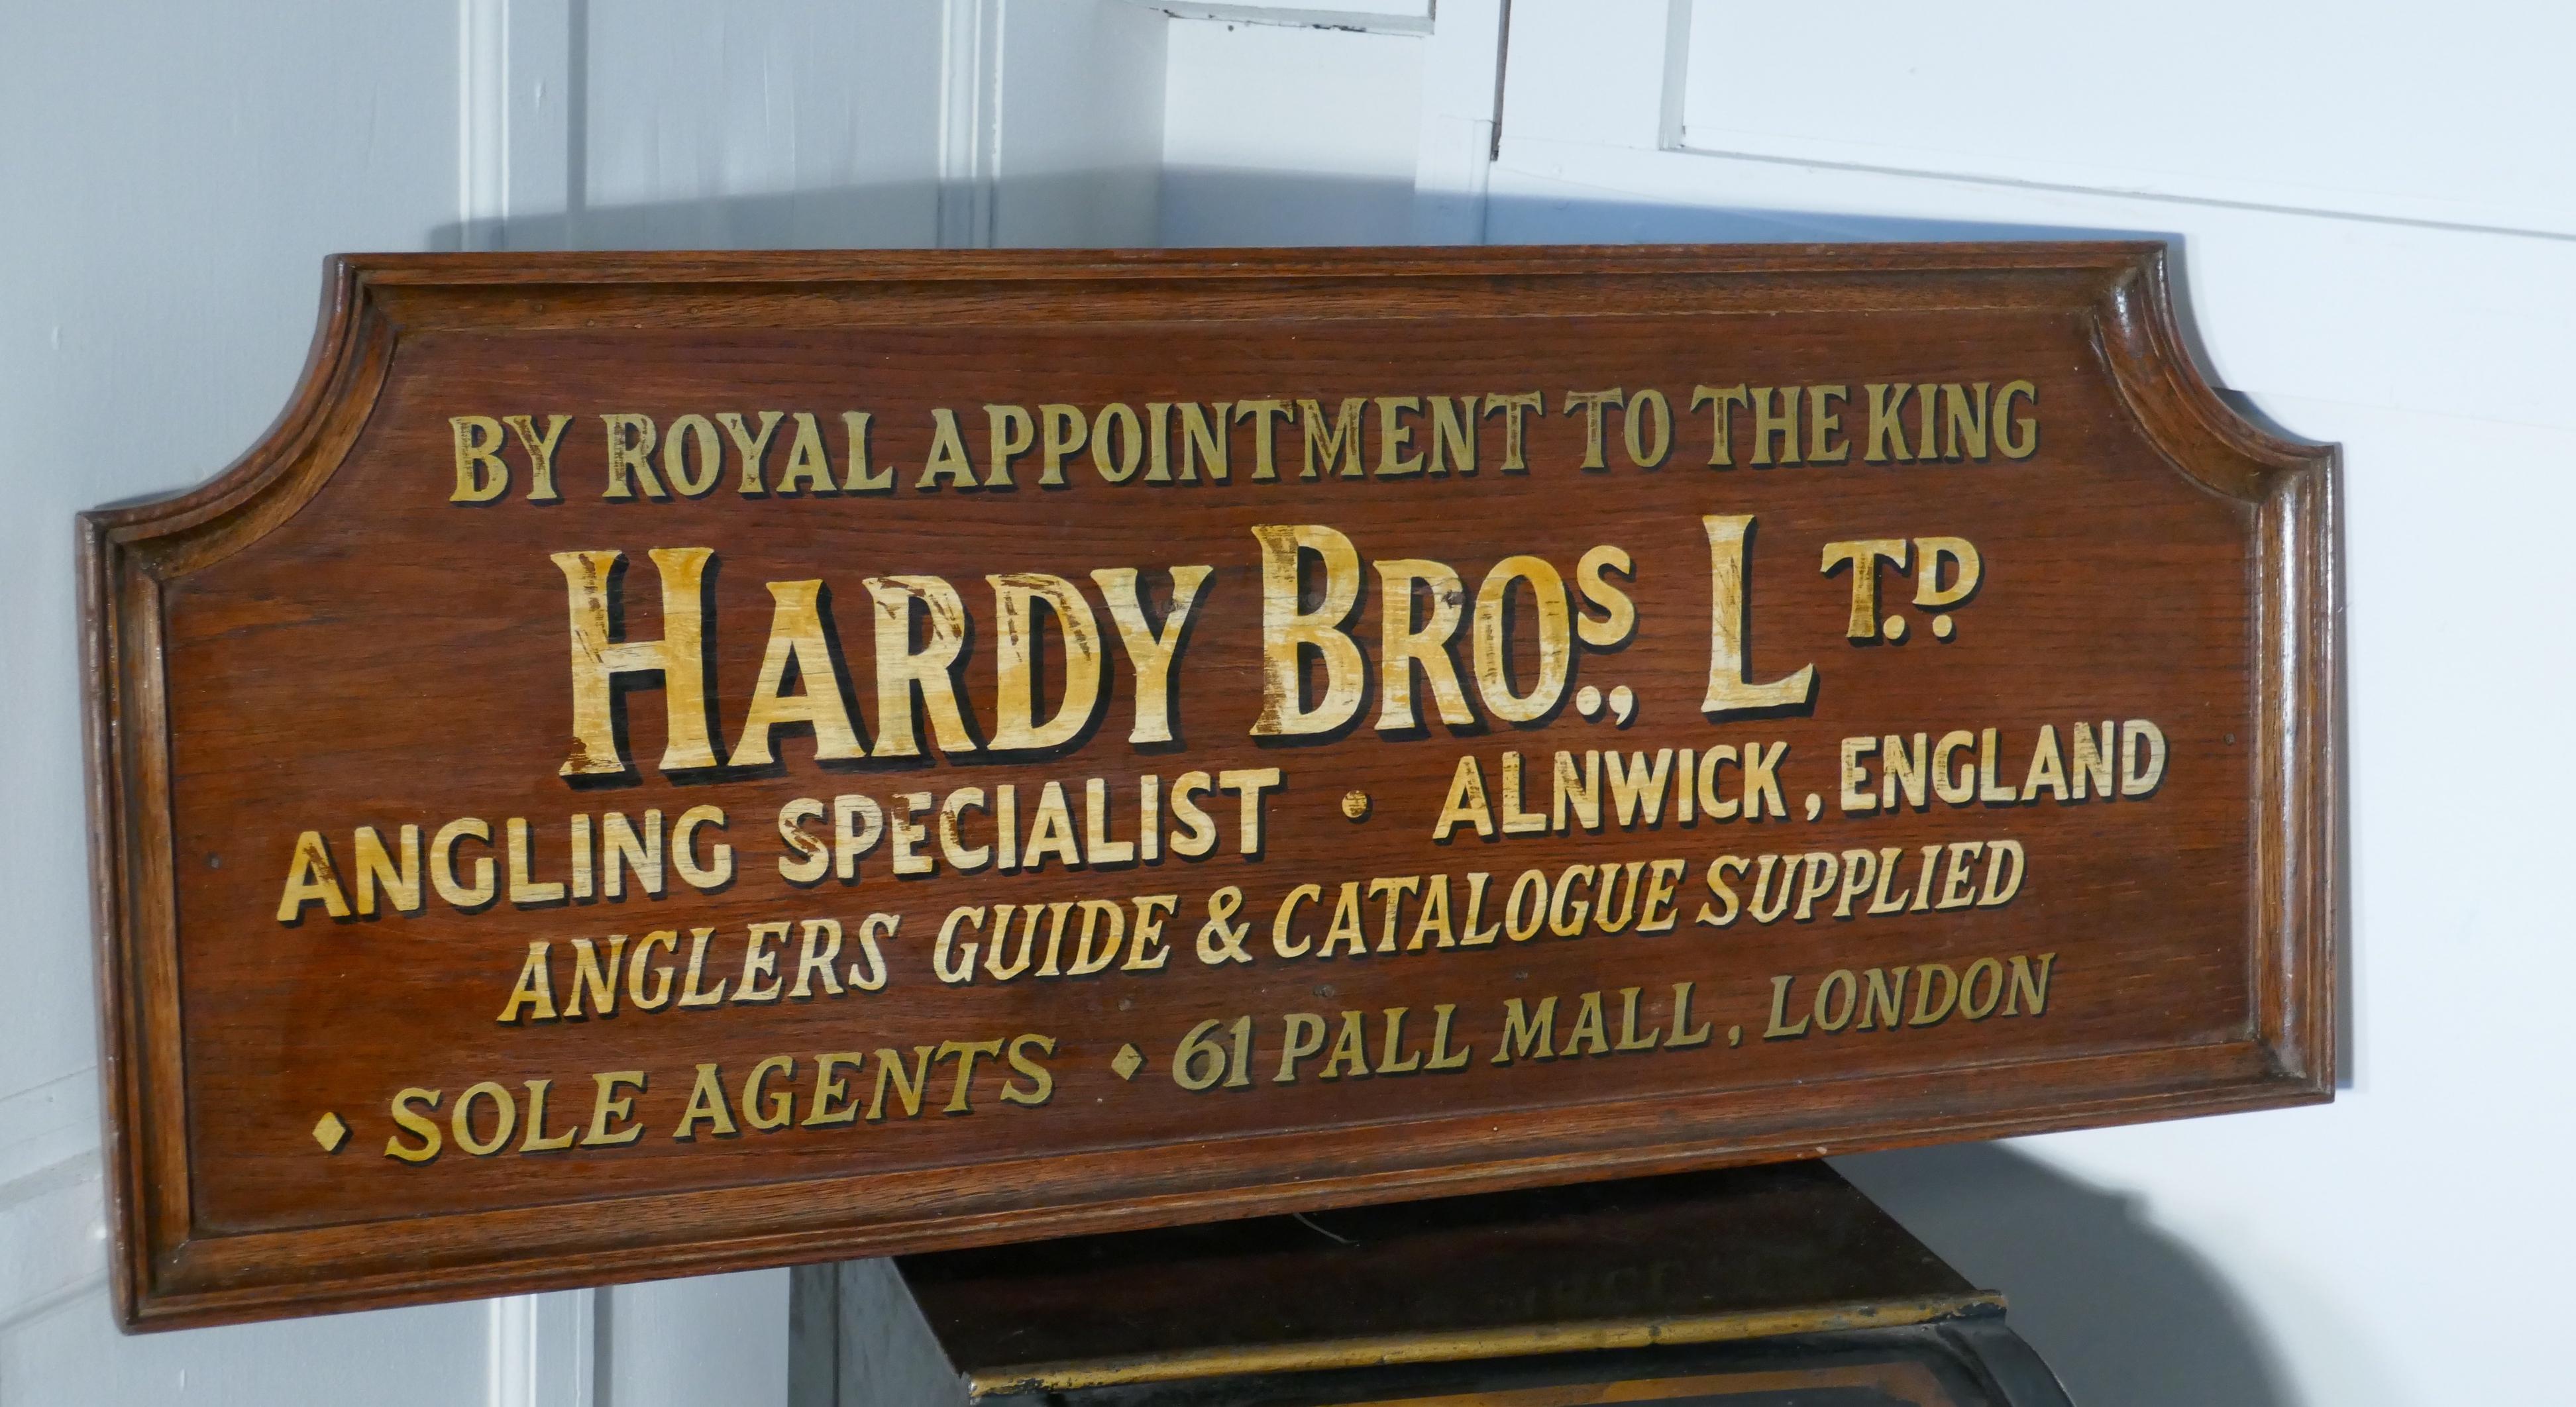 Hardy Bros Ltd, Angling Specialists large oak wall plaque 

This large wooden wall sign was painted for the London Shop which opened in 1907, it has the Royal appointment to HM the King at the top
The plaque has gold writing on an oak board with